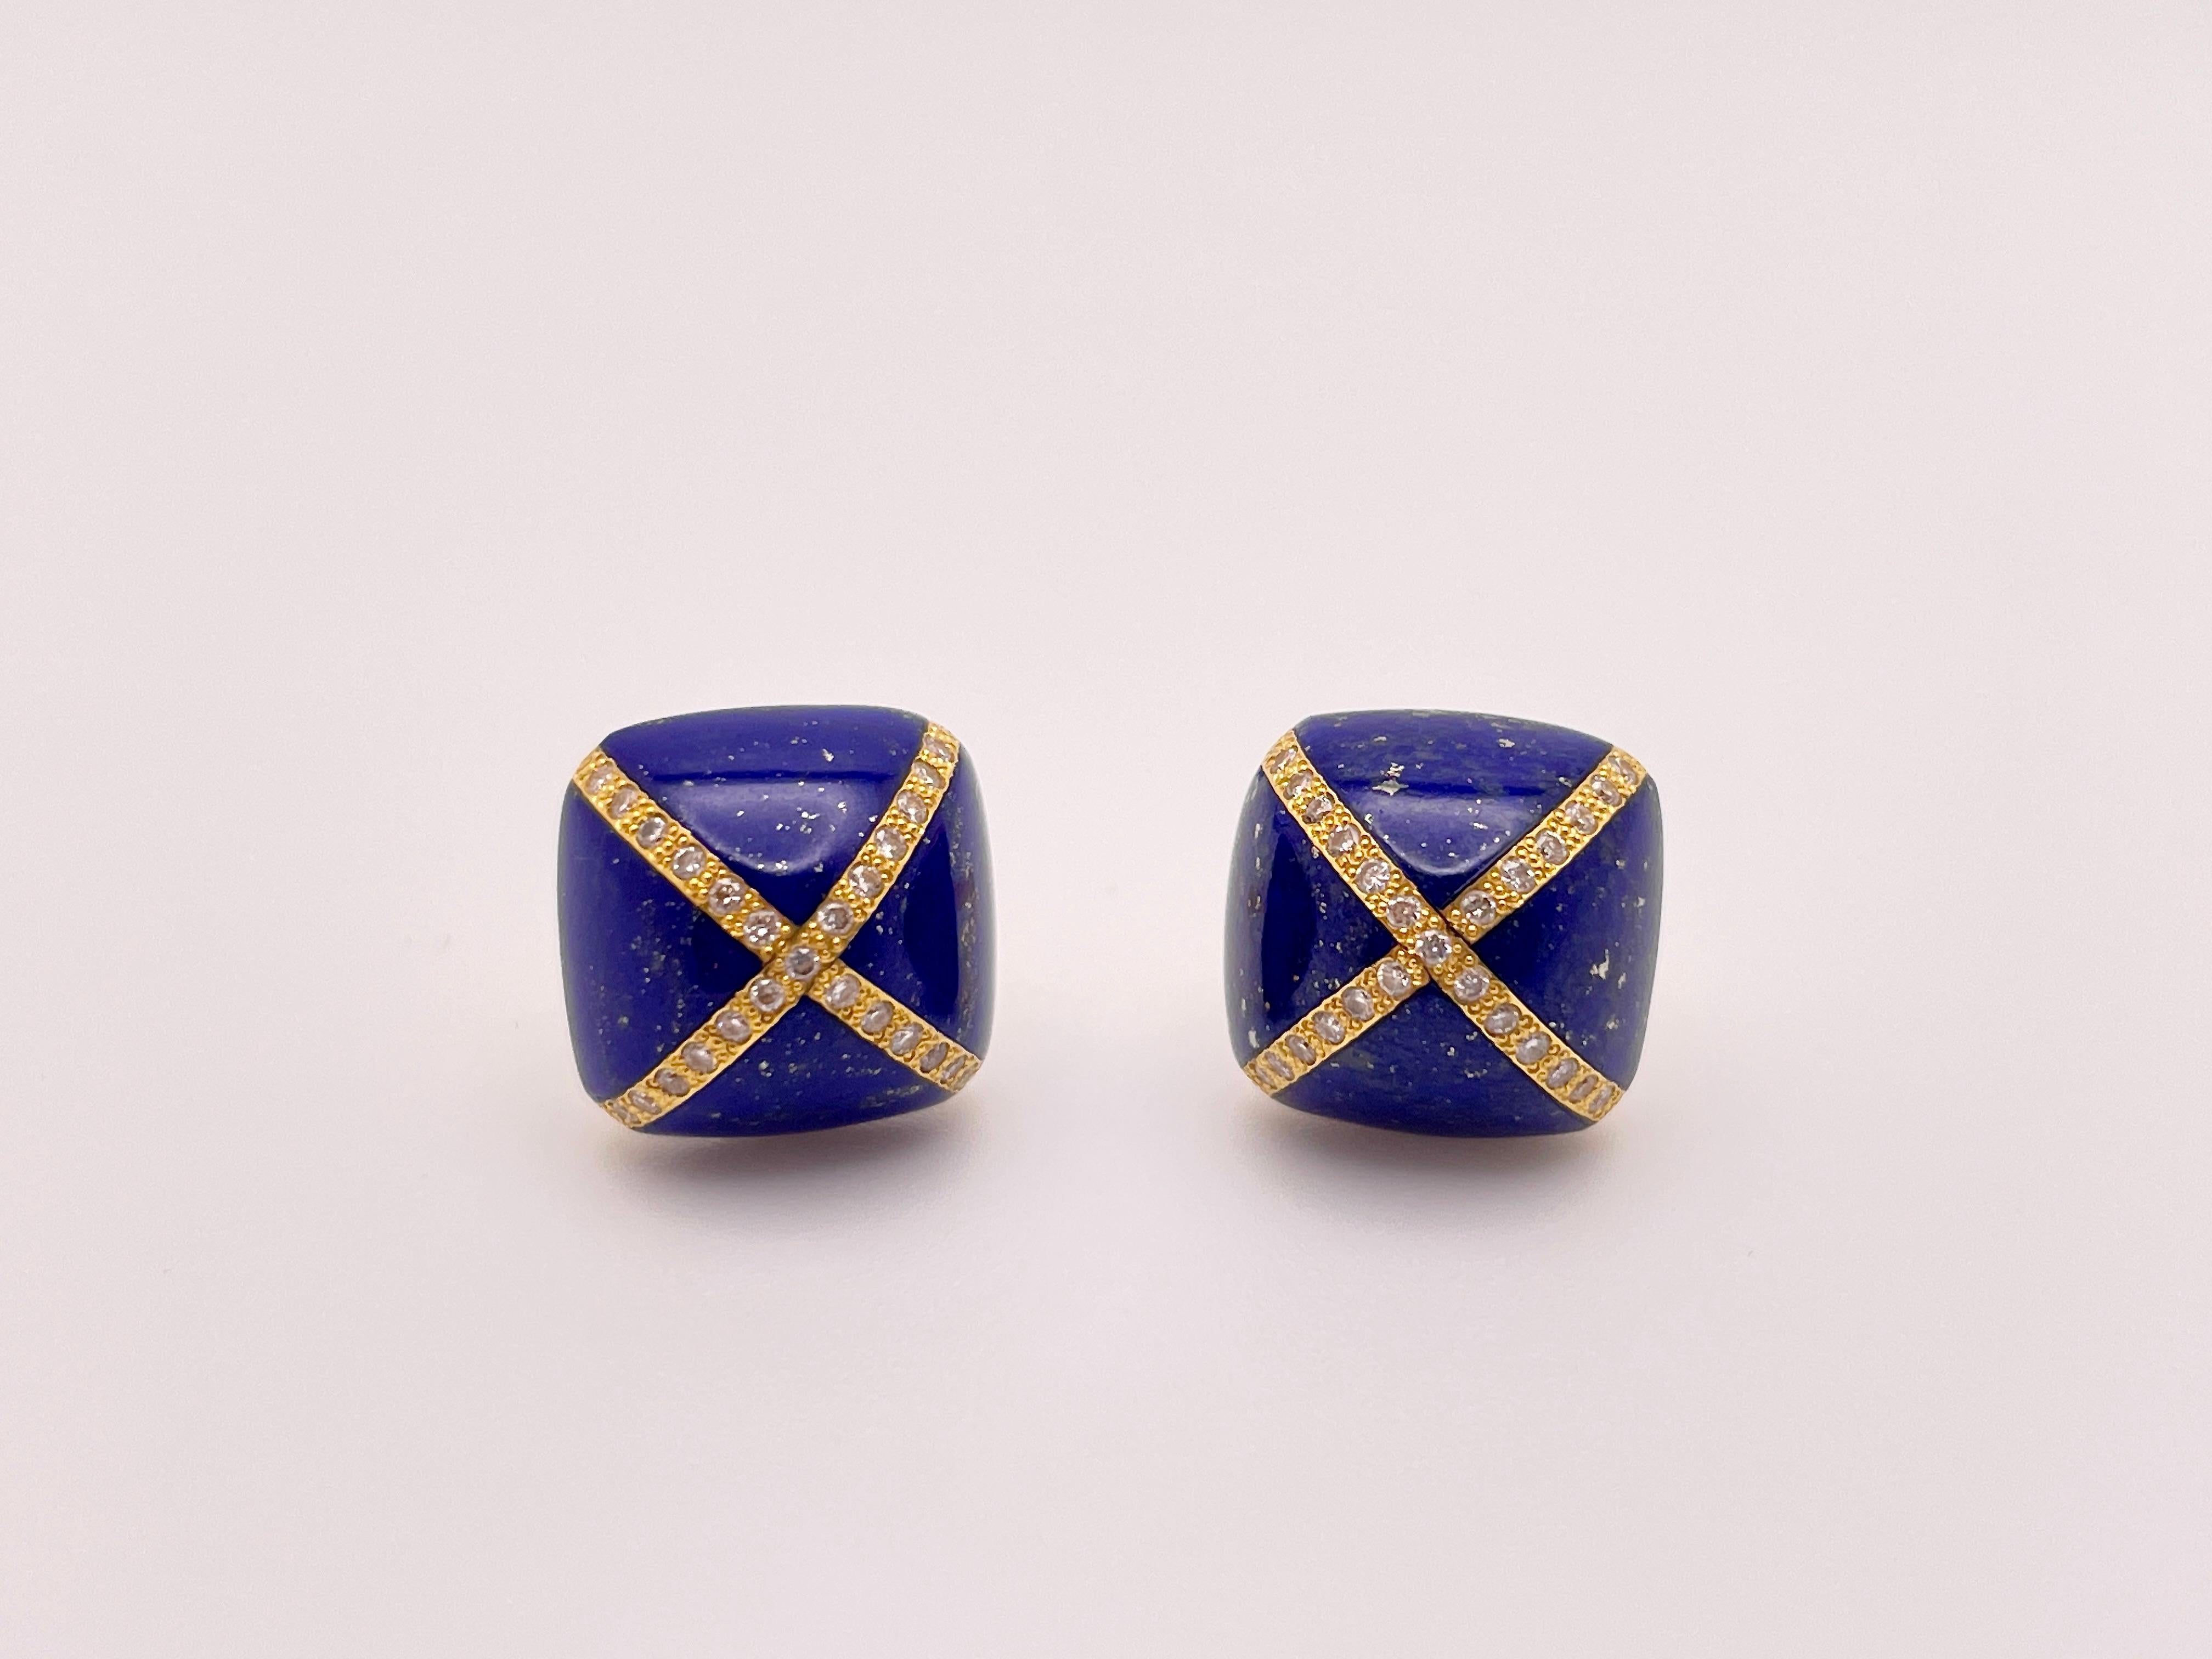 An original pair of 18K yellow gold lapis lazuli and diamond dome earrings. Circa 1930's, these magnificent earrings features an X shape of diamonds across the surface of the stone, totaling to 50 round single cut diamonds between both earrings.